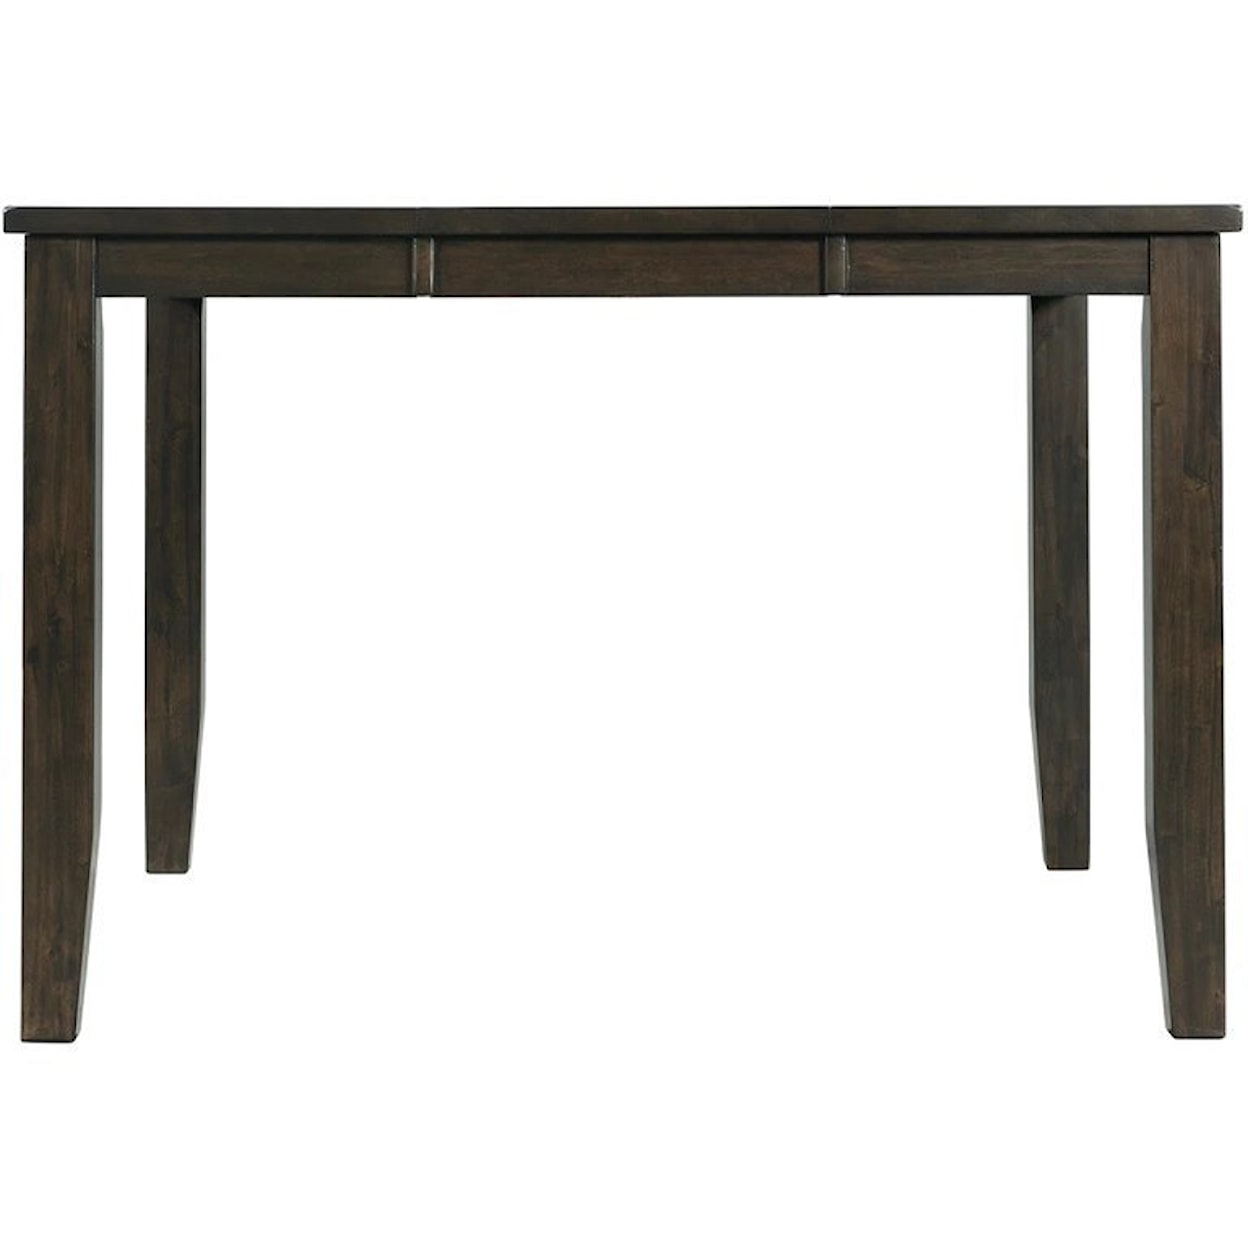 Elements International Mango Counter Height Table